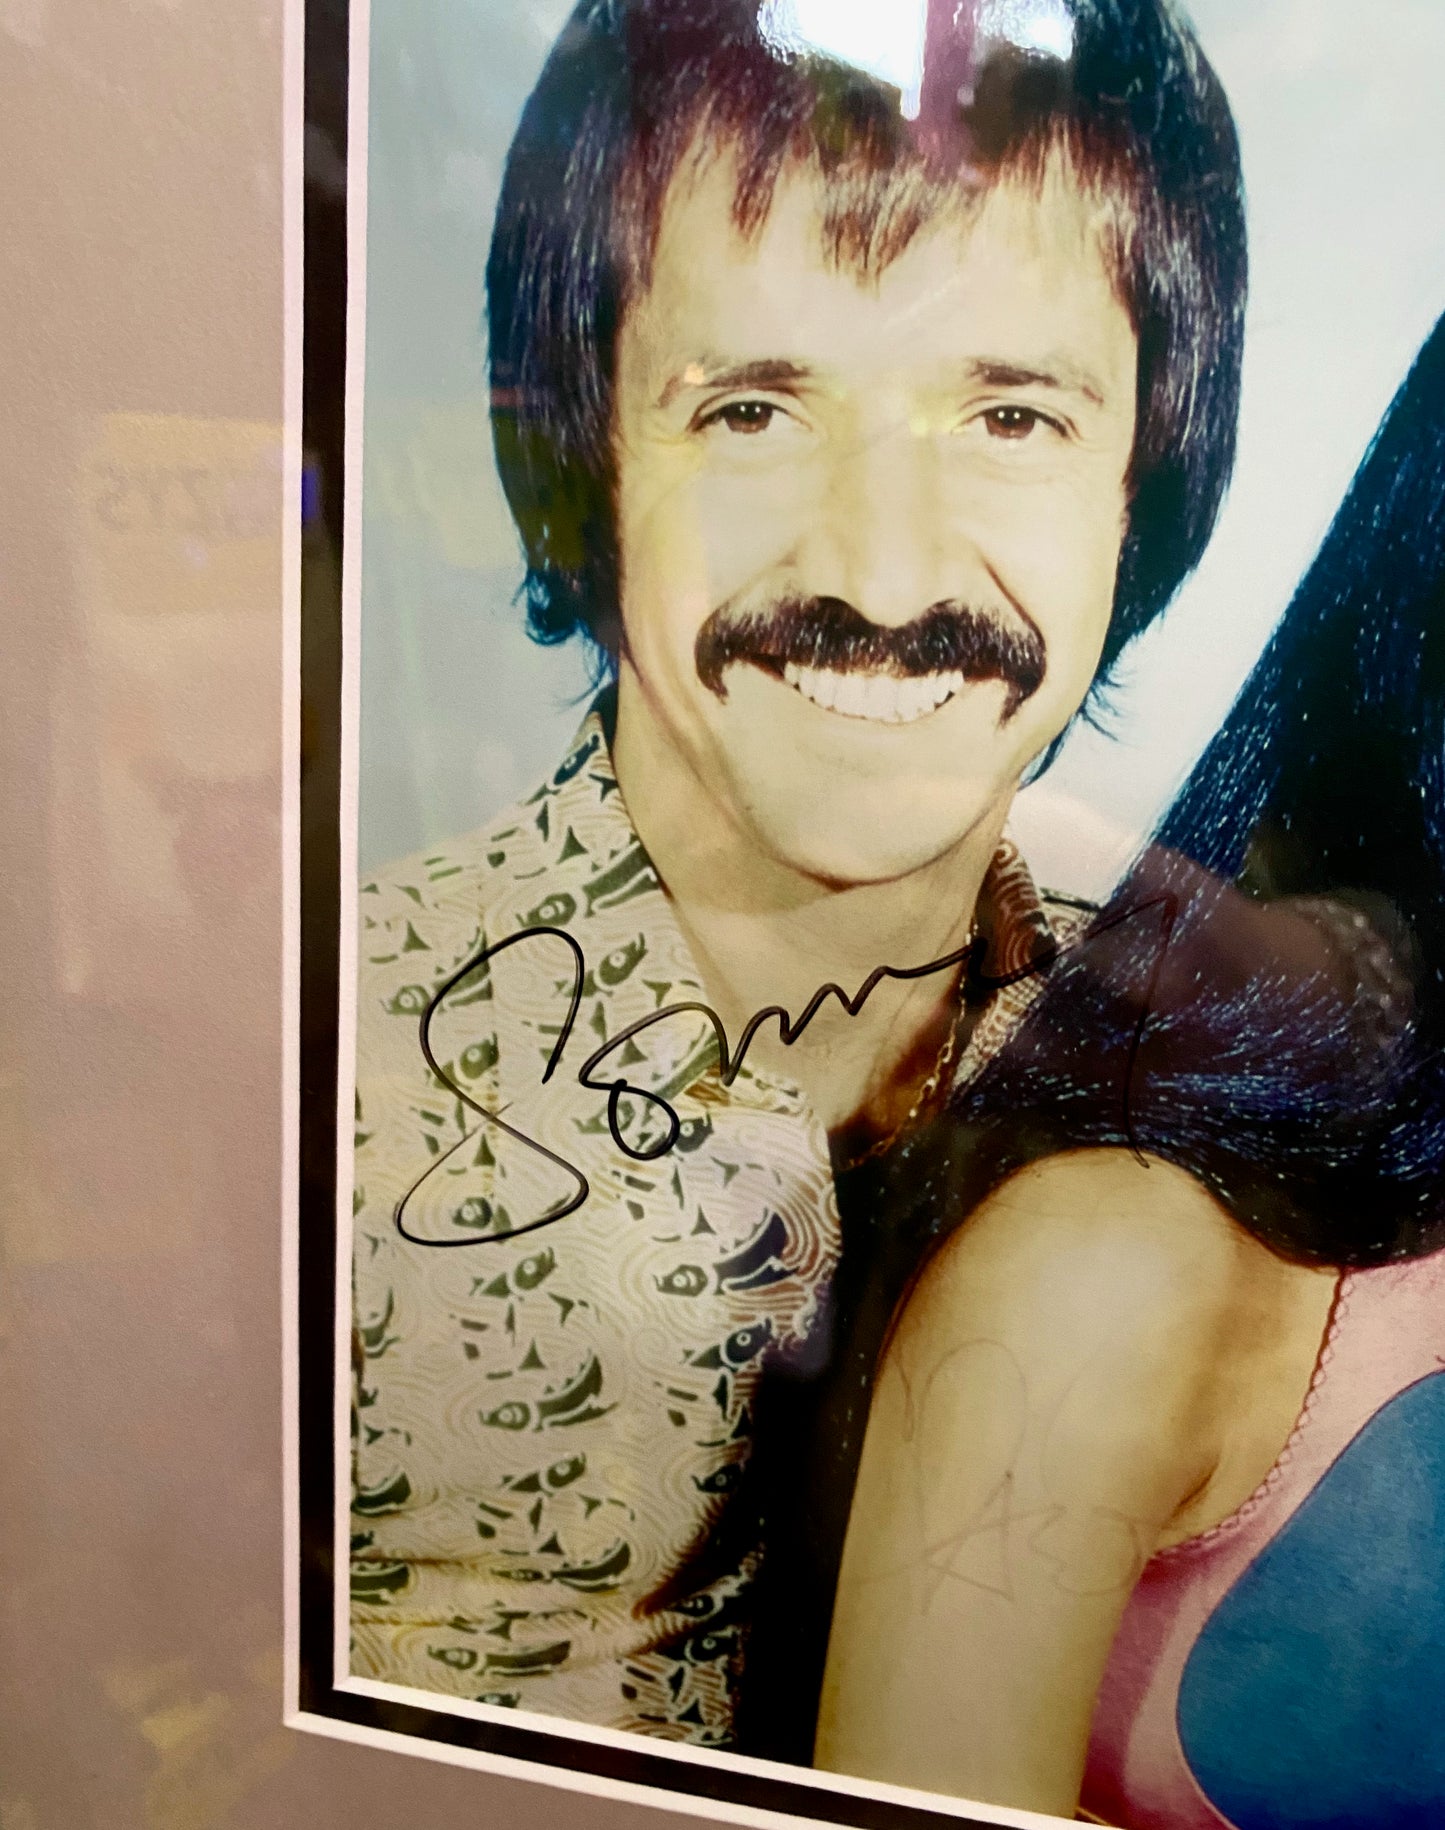 Sonny and Cher Framed Autographed Photo